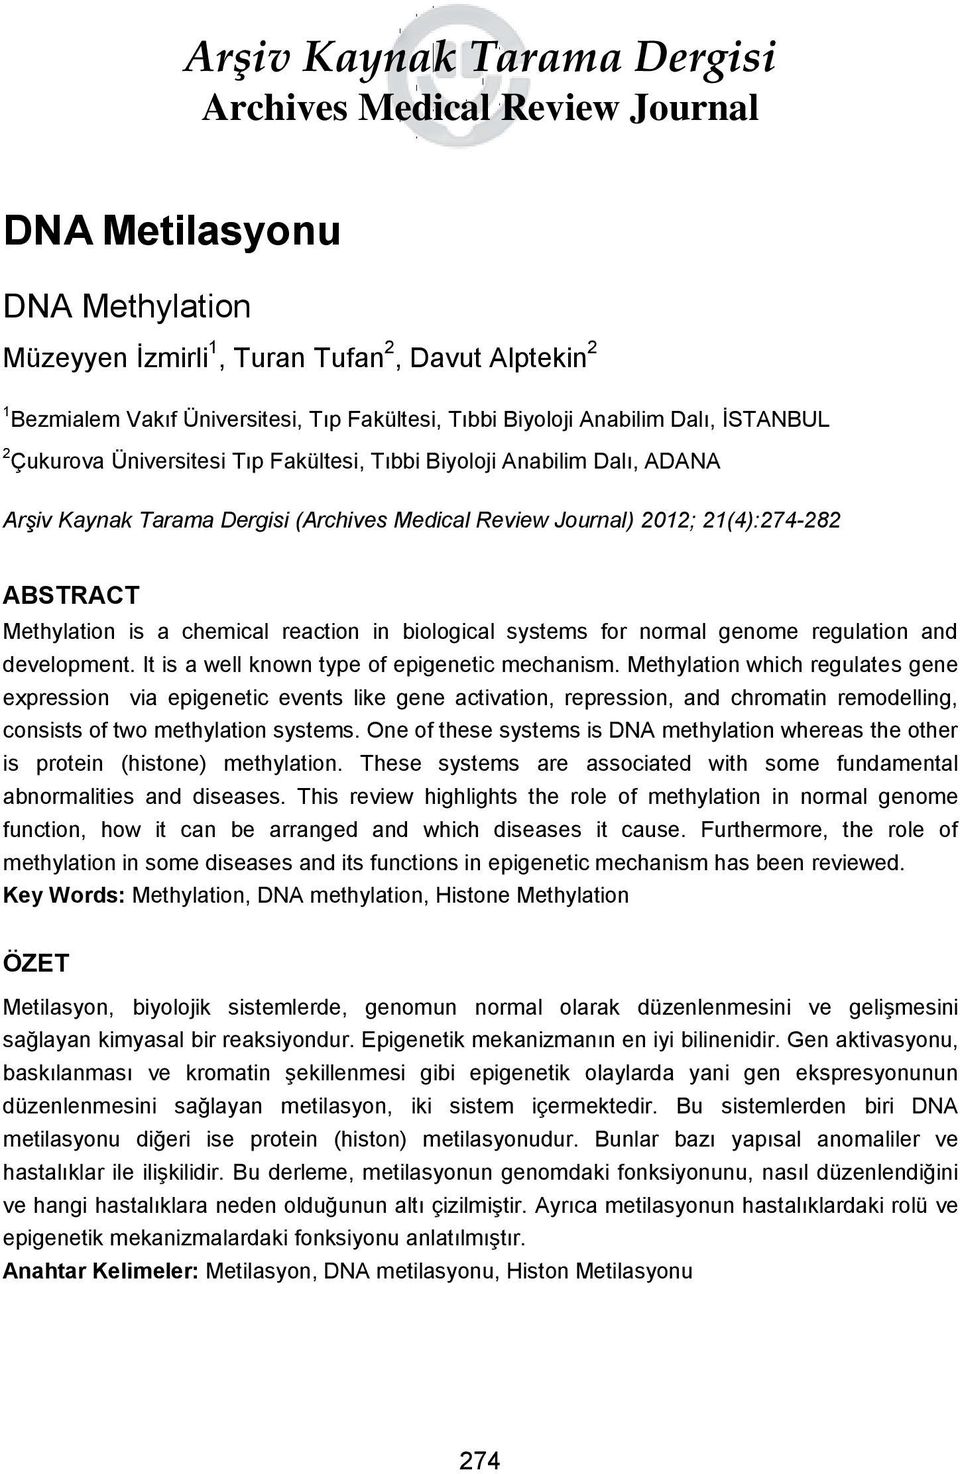 Methylation is a chemical reaction in biological systems for normal genome regulation and development. It is a well known type of epigenetic mechanism.